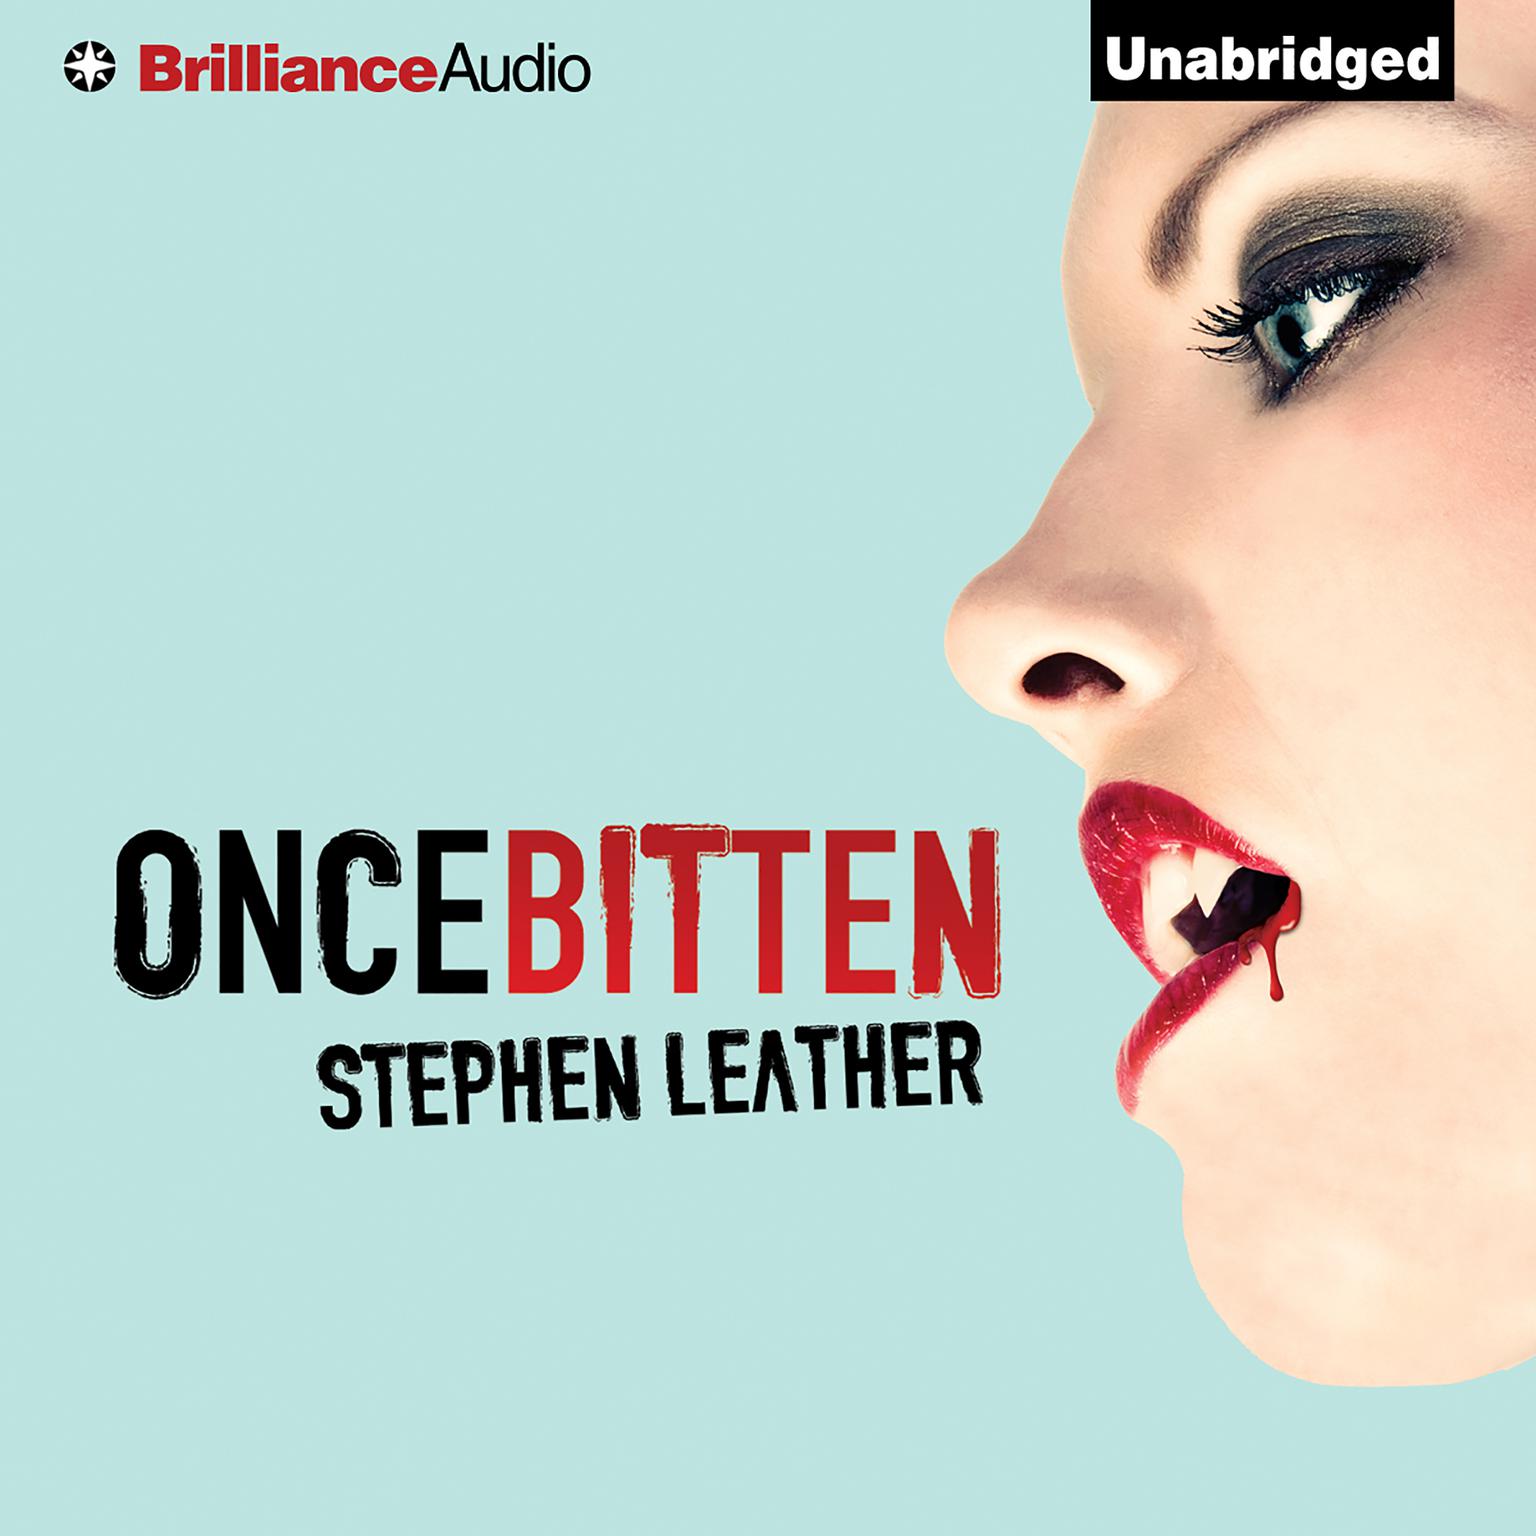 Once Bitten Audiobook, by Stephen Leather